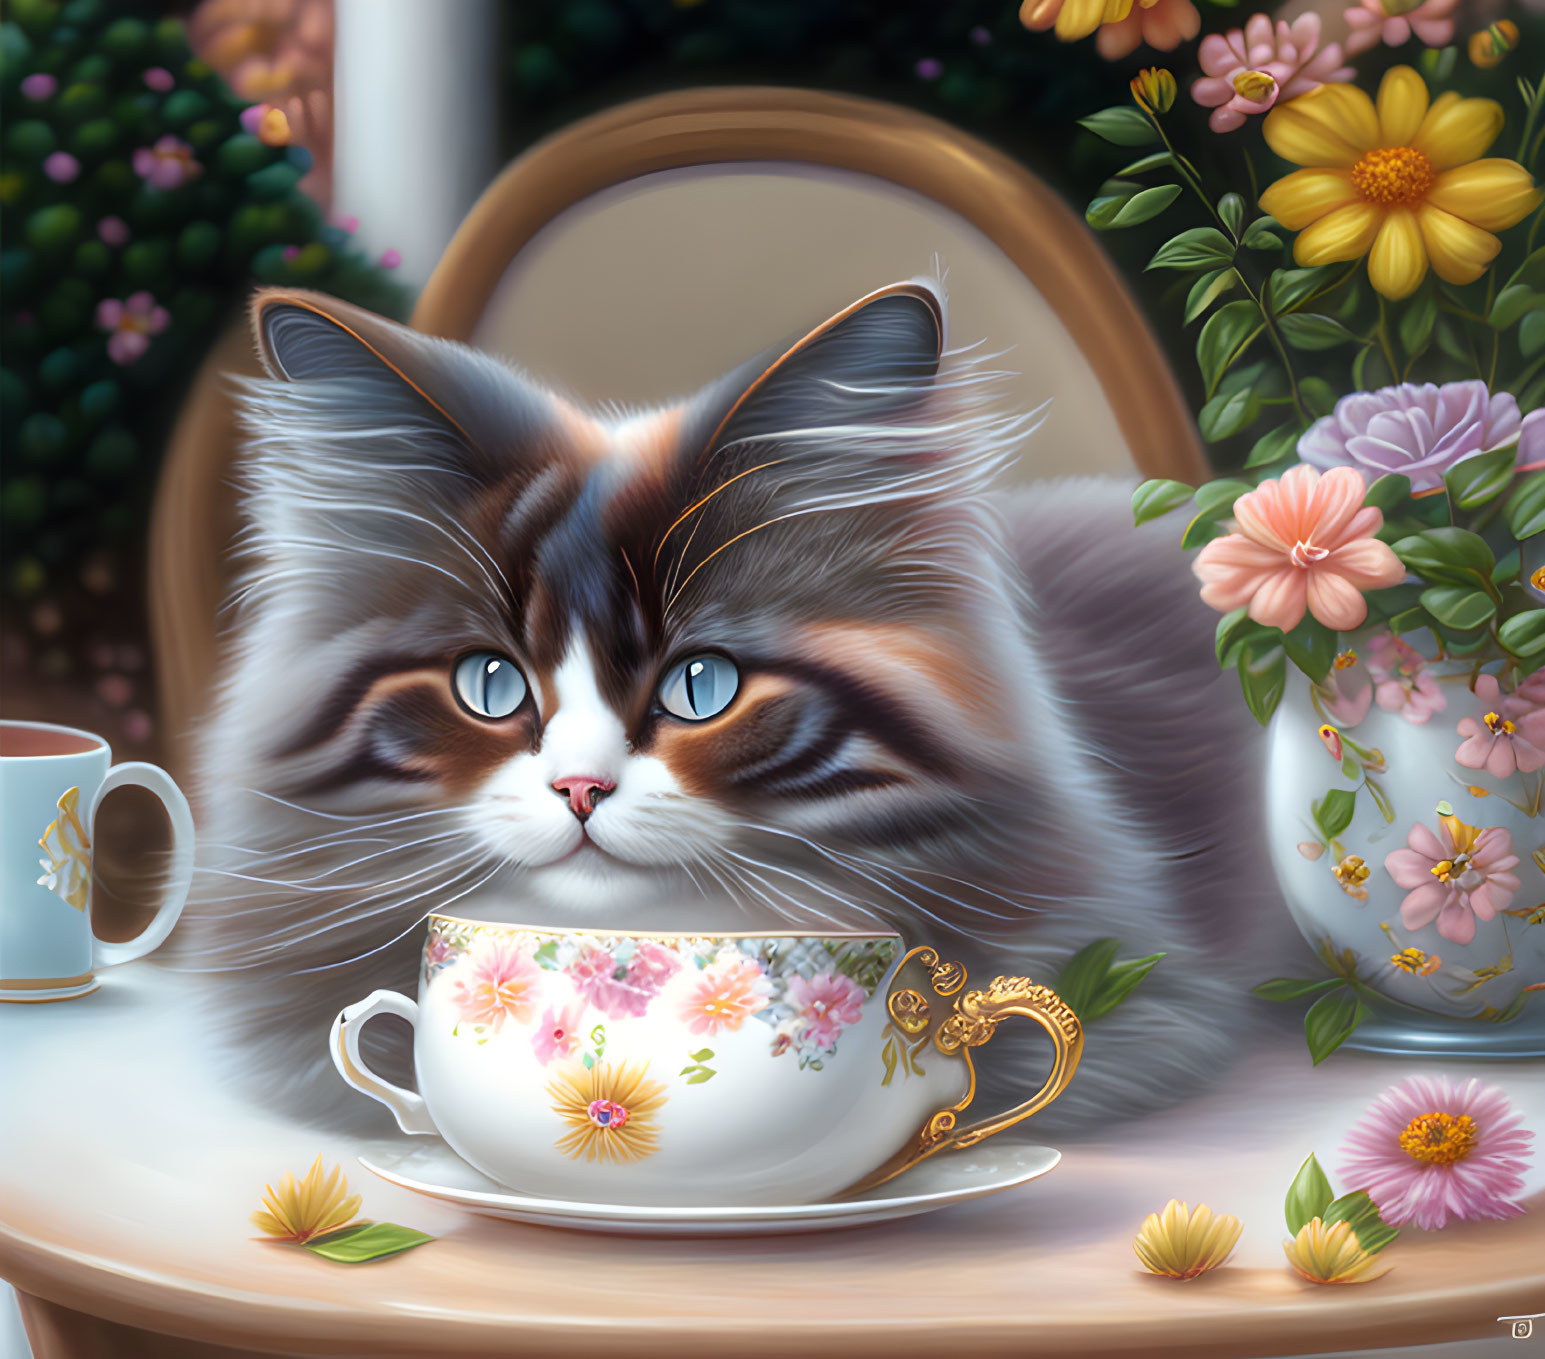 Brown and White Cat with Blue Eyes by Teacup and Flowers